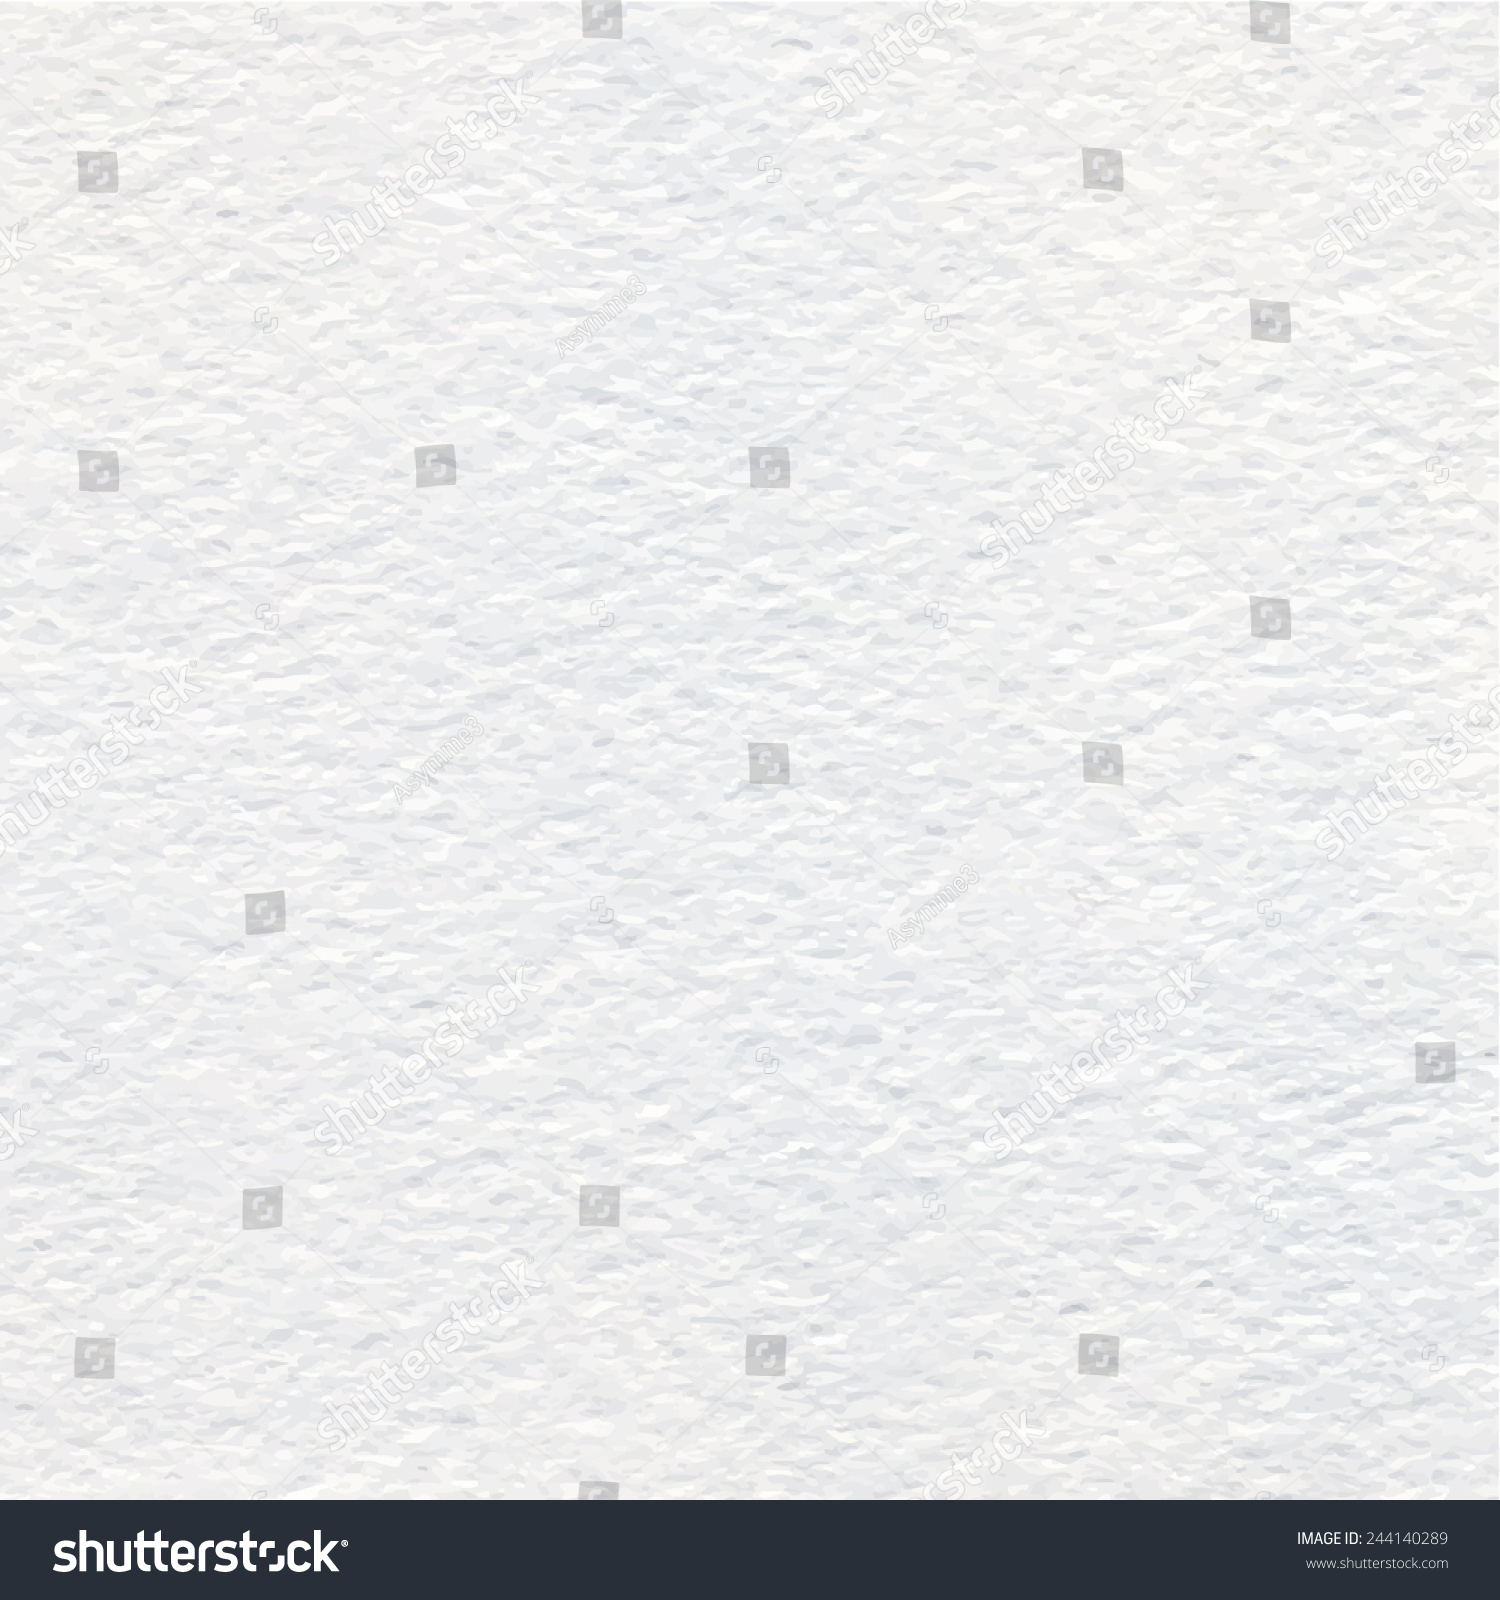 White Watercolor Paper Texture Background Vector Stock Vector ...